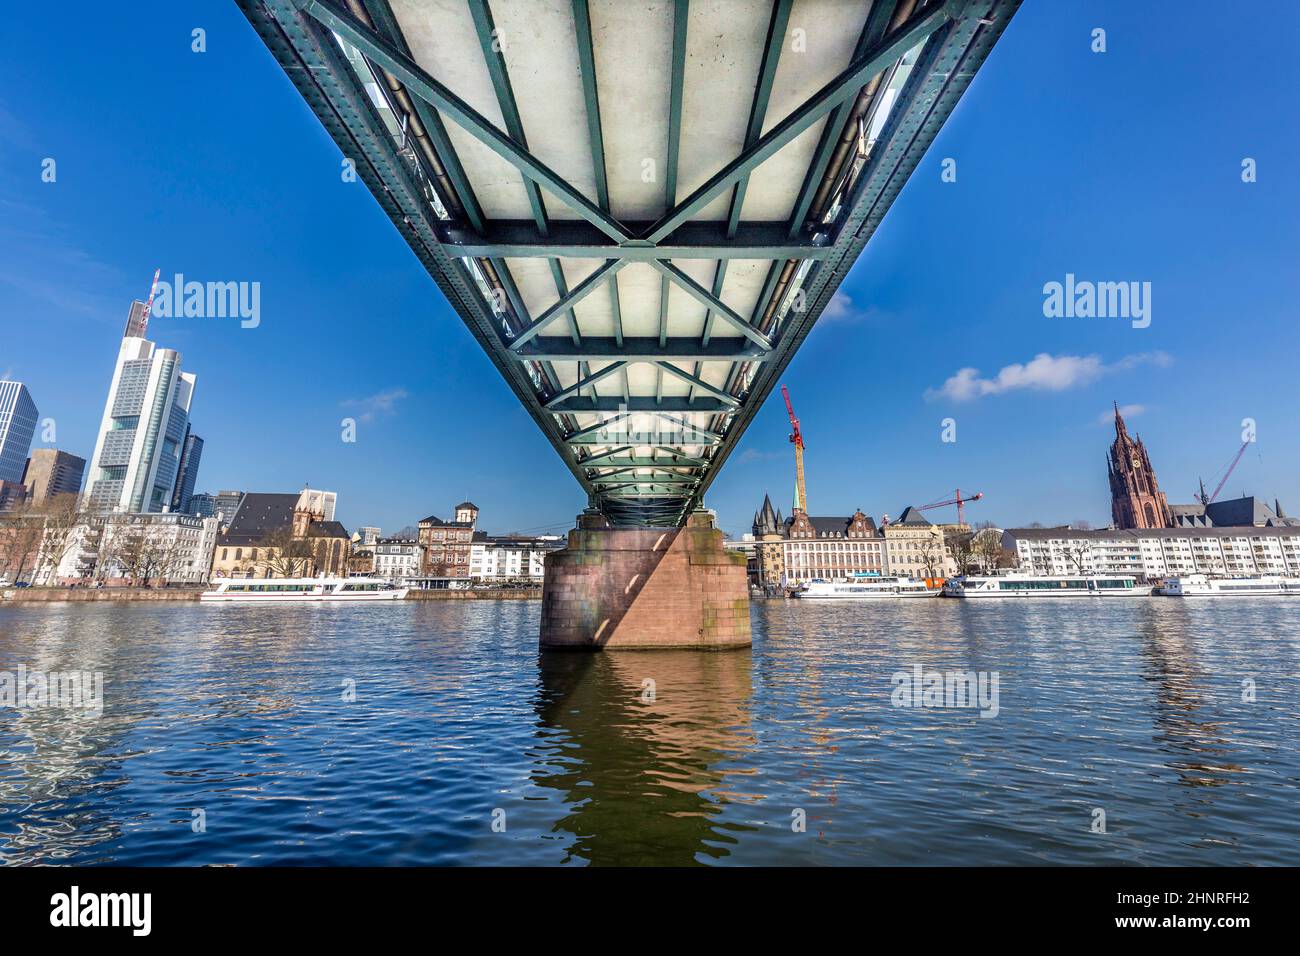 famous Eiserner steg with love locks over the river Main Stock Photo